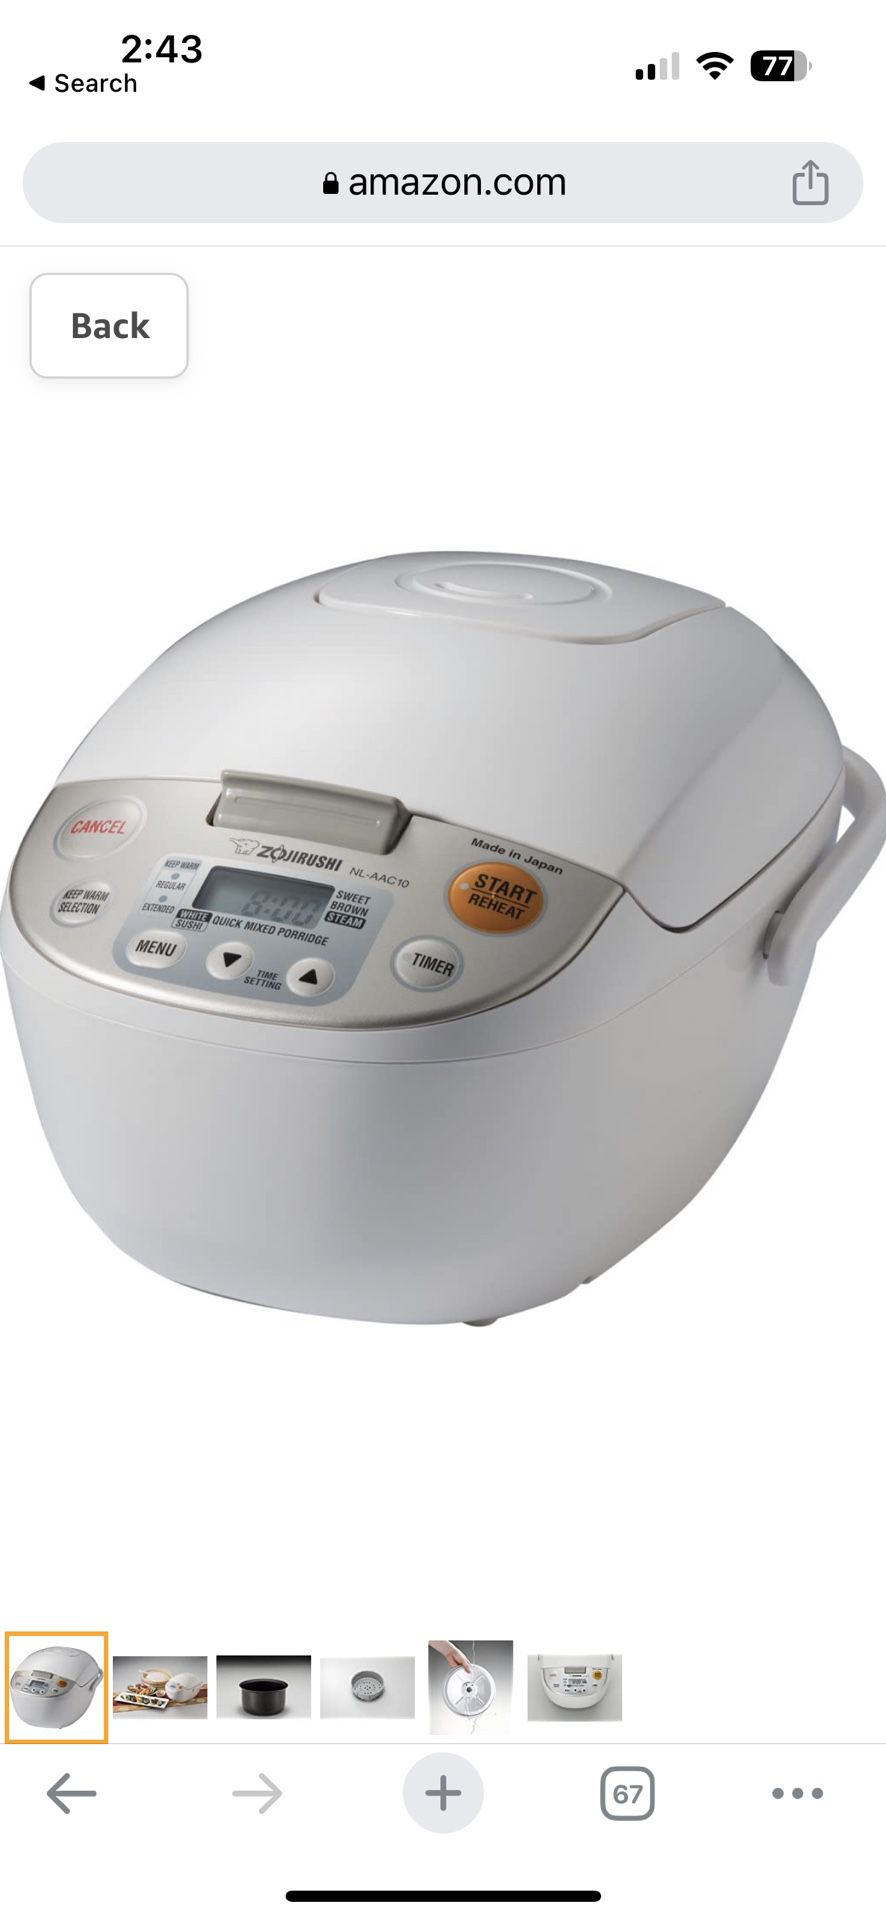 BRAND NEW Zojirushi NL-AAC10 Micom Rice Cooker (Uncooked) and Warmer, 5.5  Cups/1.0-Liter, 1.0 L for Sale in Covina, CA OfferUp